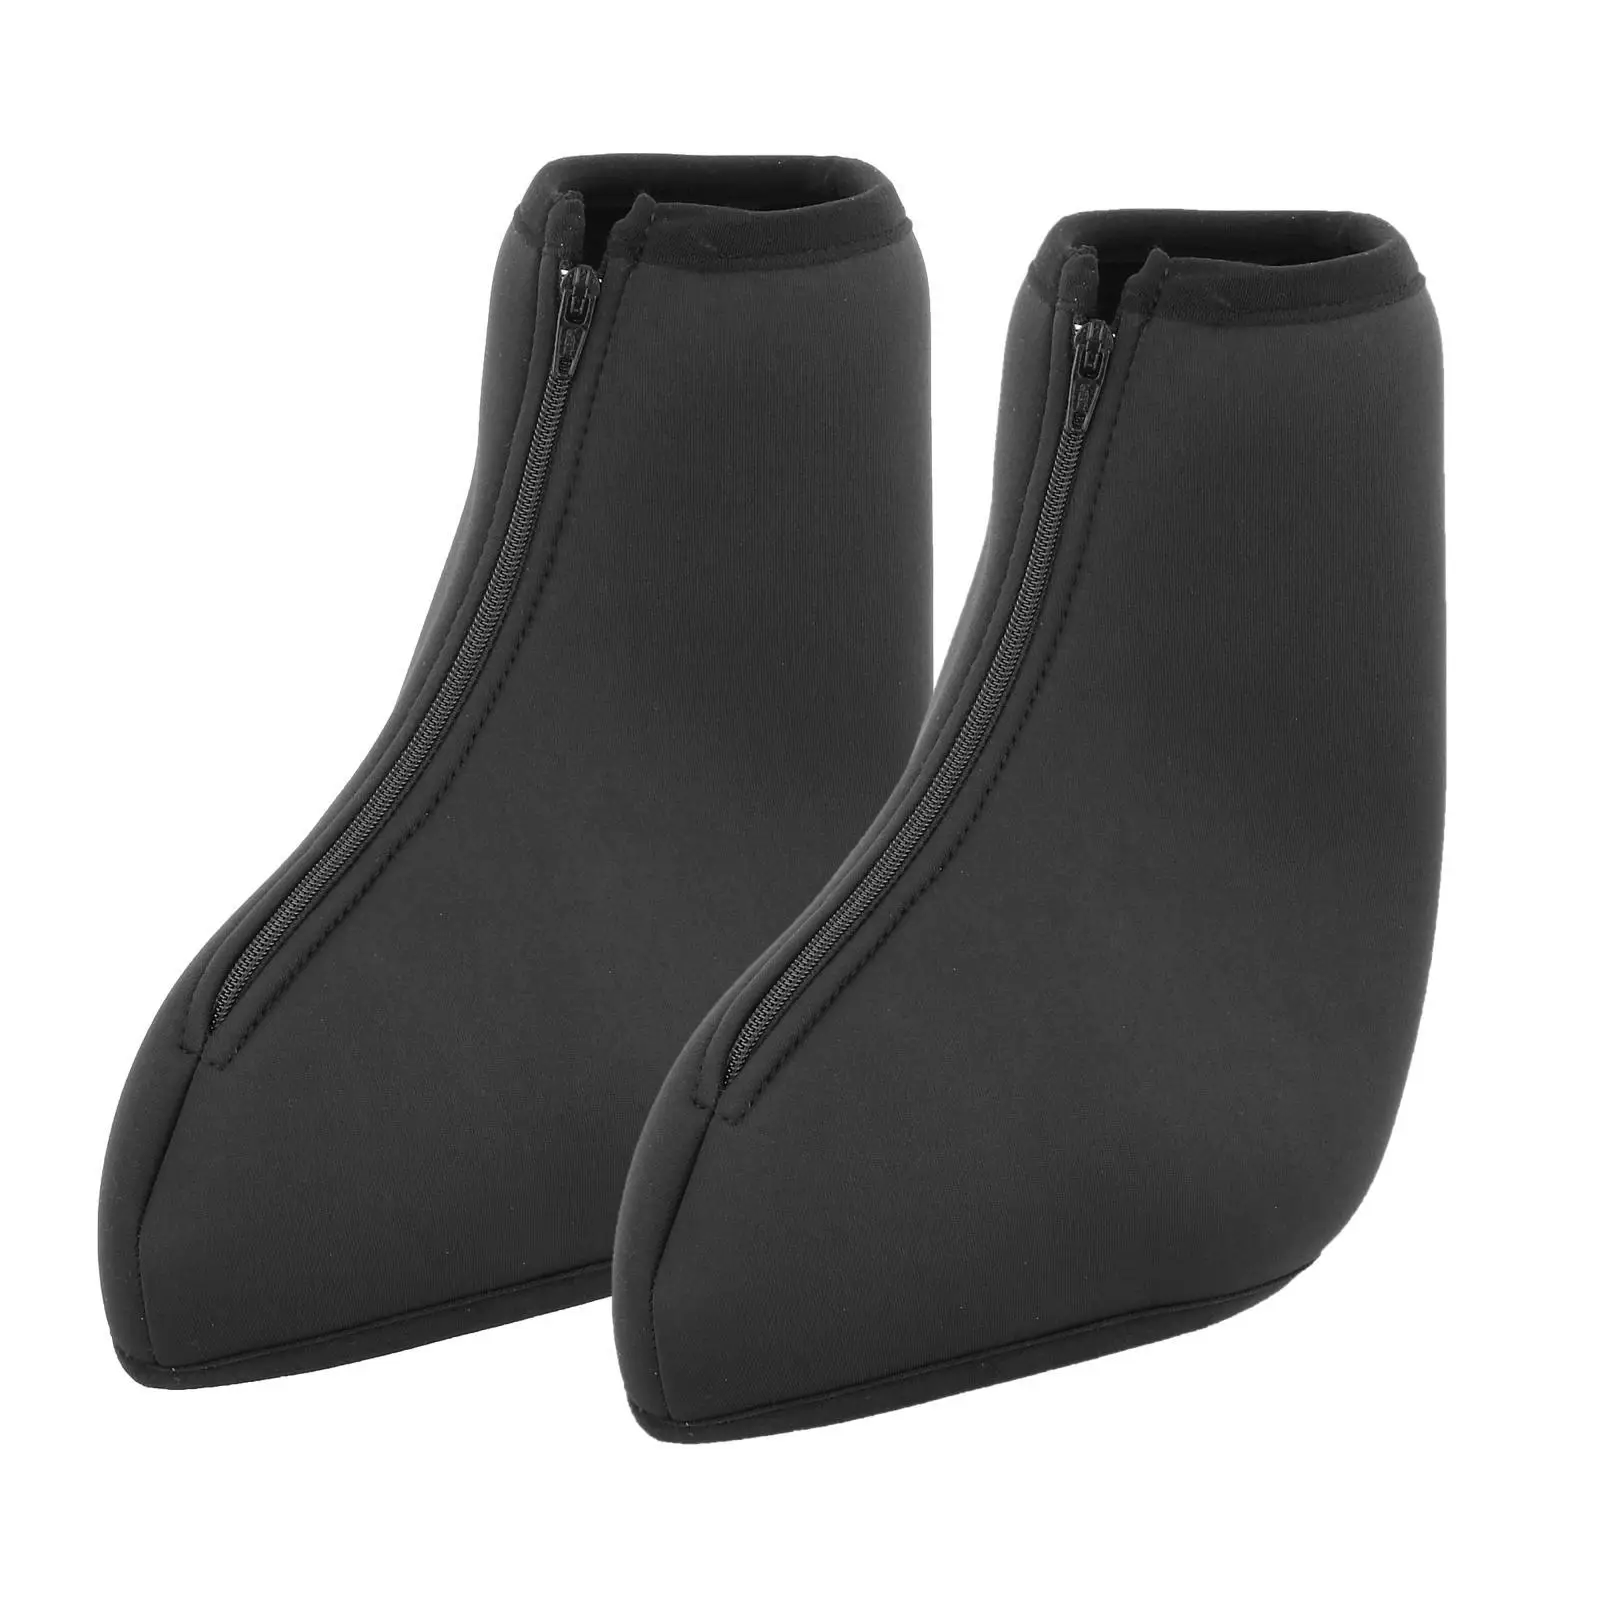 Premium Ice Roller Figure Skating Boot Cover Overshoes Skates Black Cover